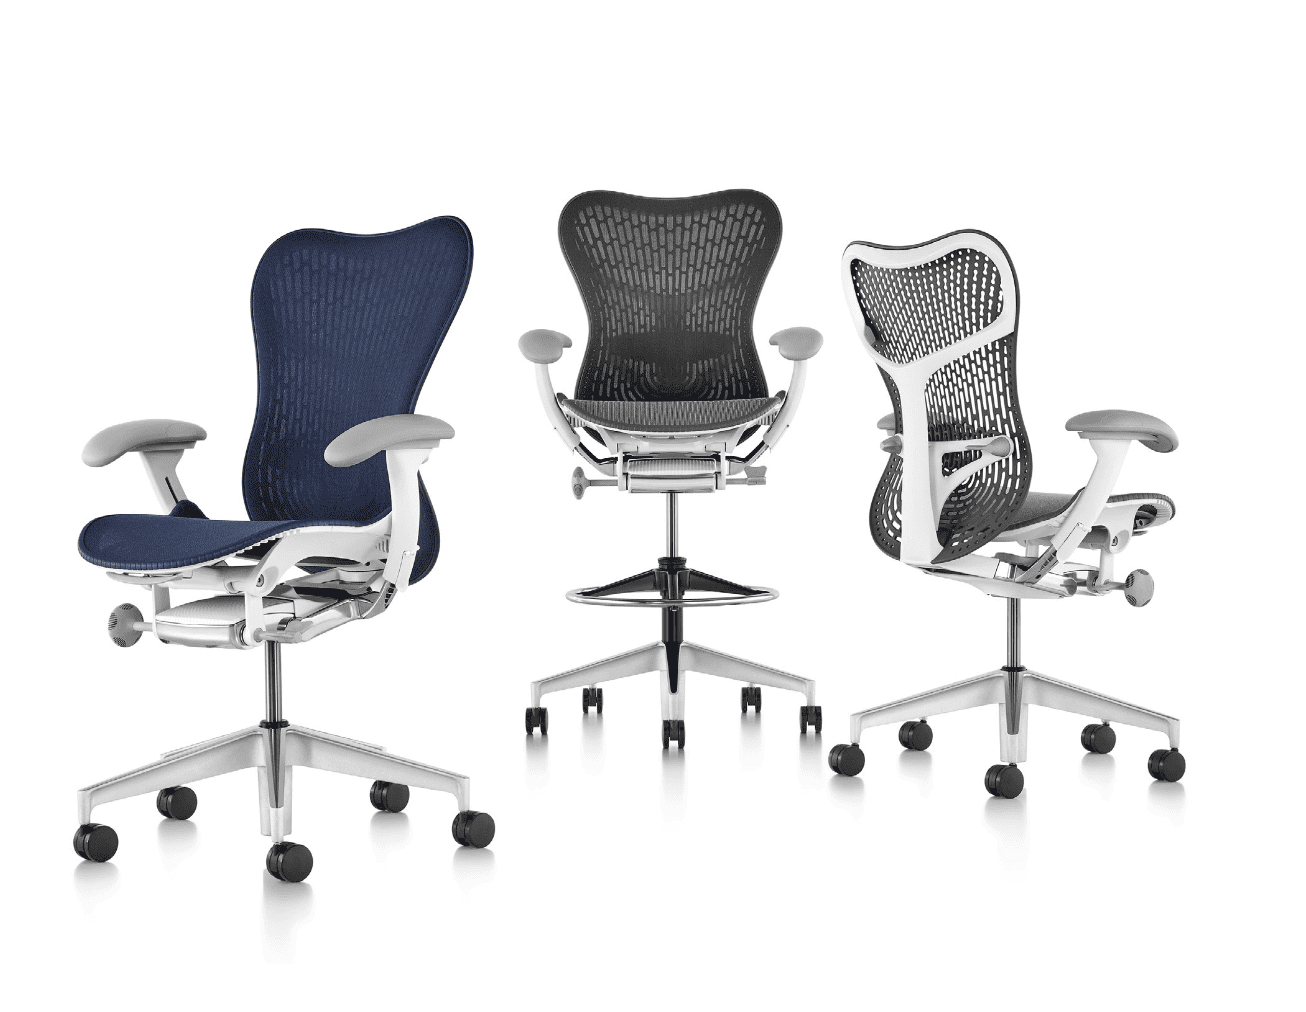 Three Mirra2 chairs: one blue and two dark gray.